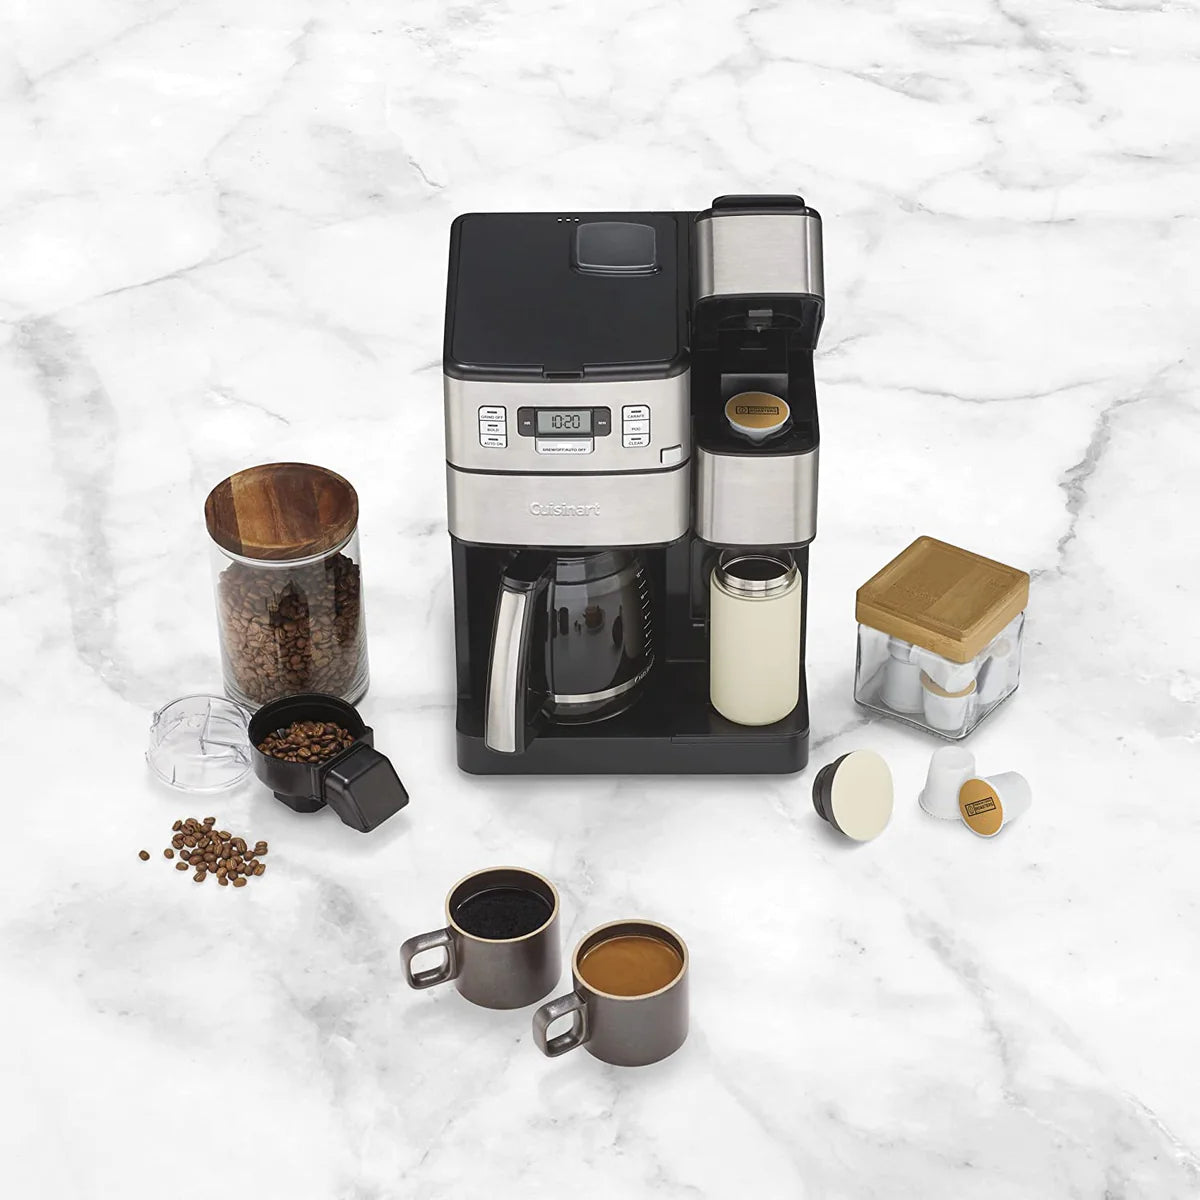 Brewing Excellence on a Budget - The Top 4 Certified Refurbished Coffee Makers on Verdi.com